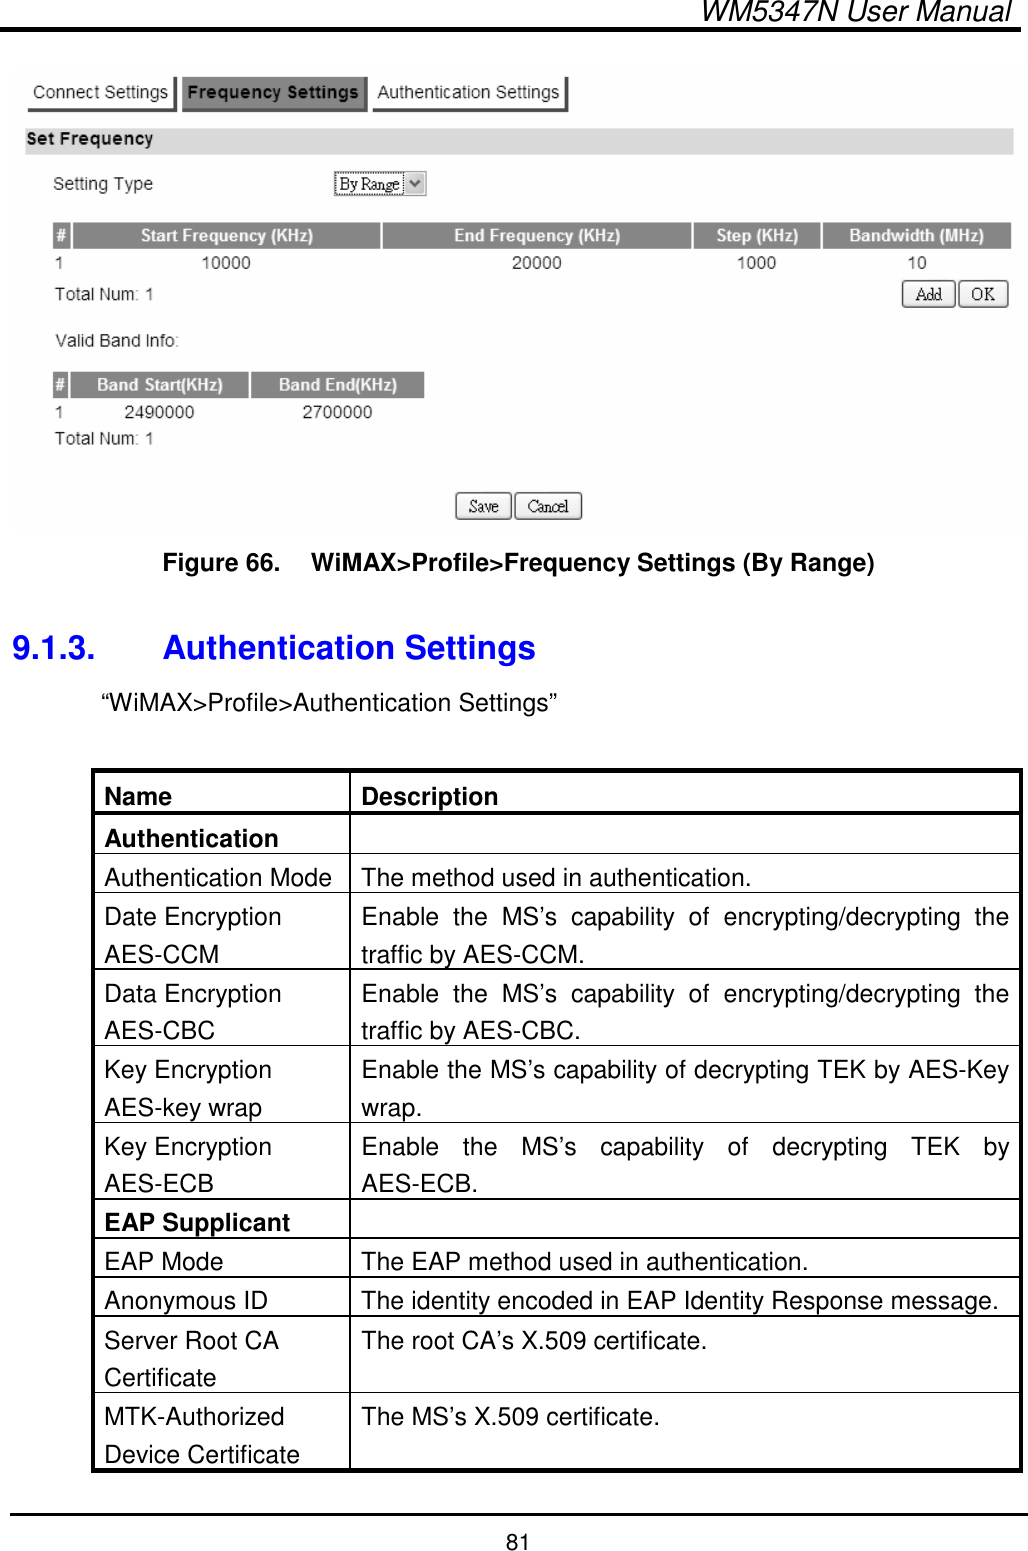  WM5347N User Manual  81  Figure 66.   WiMAX&gt;Profile&gt;Frequency Settings (By Range)  9.1.3.  Authentication Settings “WiMAX&gt;Profile&gt;Authentication Settings”  Name  Description Authentication   Authentication Mode The method used in authentication. Date Encryption AES-CCM Enable  the  MS’s  capability  of  encrypting/decrypting  the traffic by AES-CCM. Data Encryption AES-CBC Enable  the  MS’s  capability  of  encrypting/decrypting  the traffic by AES-CBC. Key Encryption AES-key wrap Enable the MS’s capability of decrypting TEK by AES-Key wrap. Key Encryption AES-ECB Enable  the  MS’s  capability  of  decrypting  TEK  by AES-ECB. EAP Supplicant   EAP Mode  The EAP method used in authentication. Anonymous ID  The identity encoded in EAP Identity Response message. Server Root CA Certificate The root CA’s X.509 certificate. MTK-Authorized Device Certificate The MS’s X.509 certificate. 